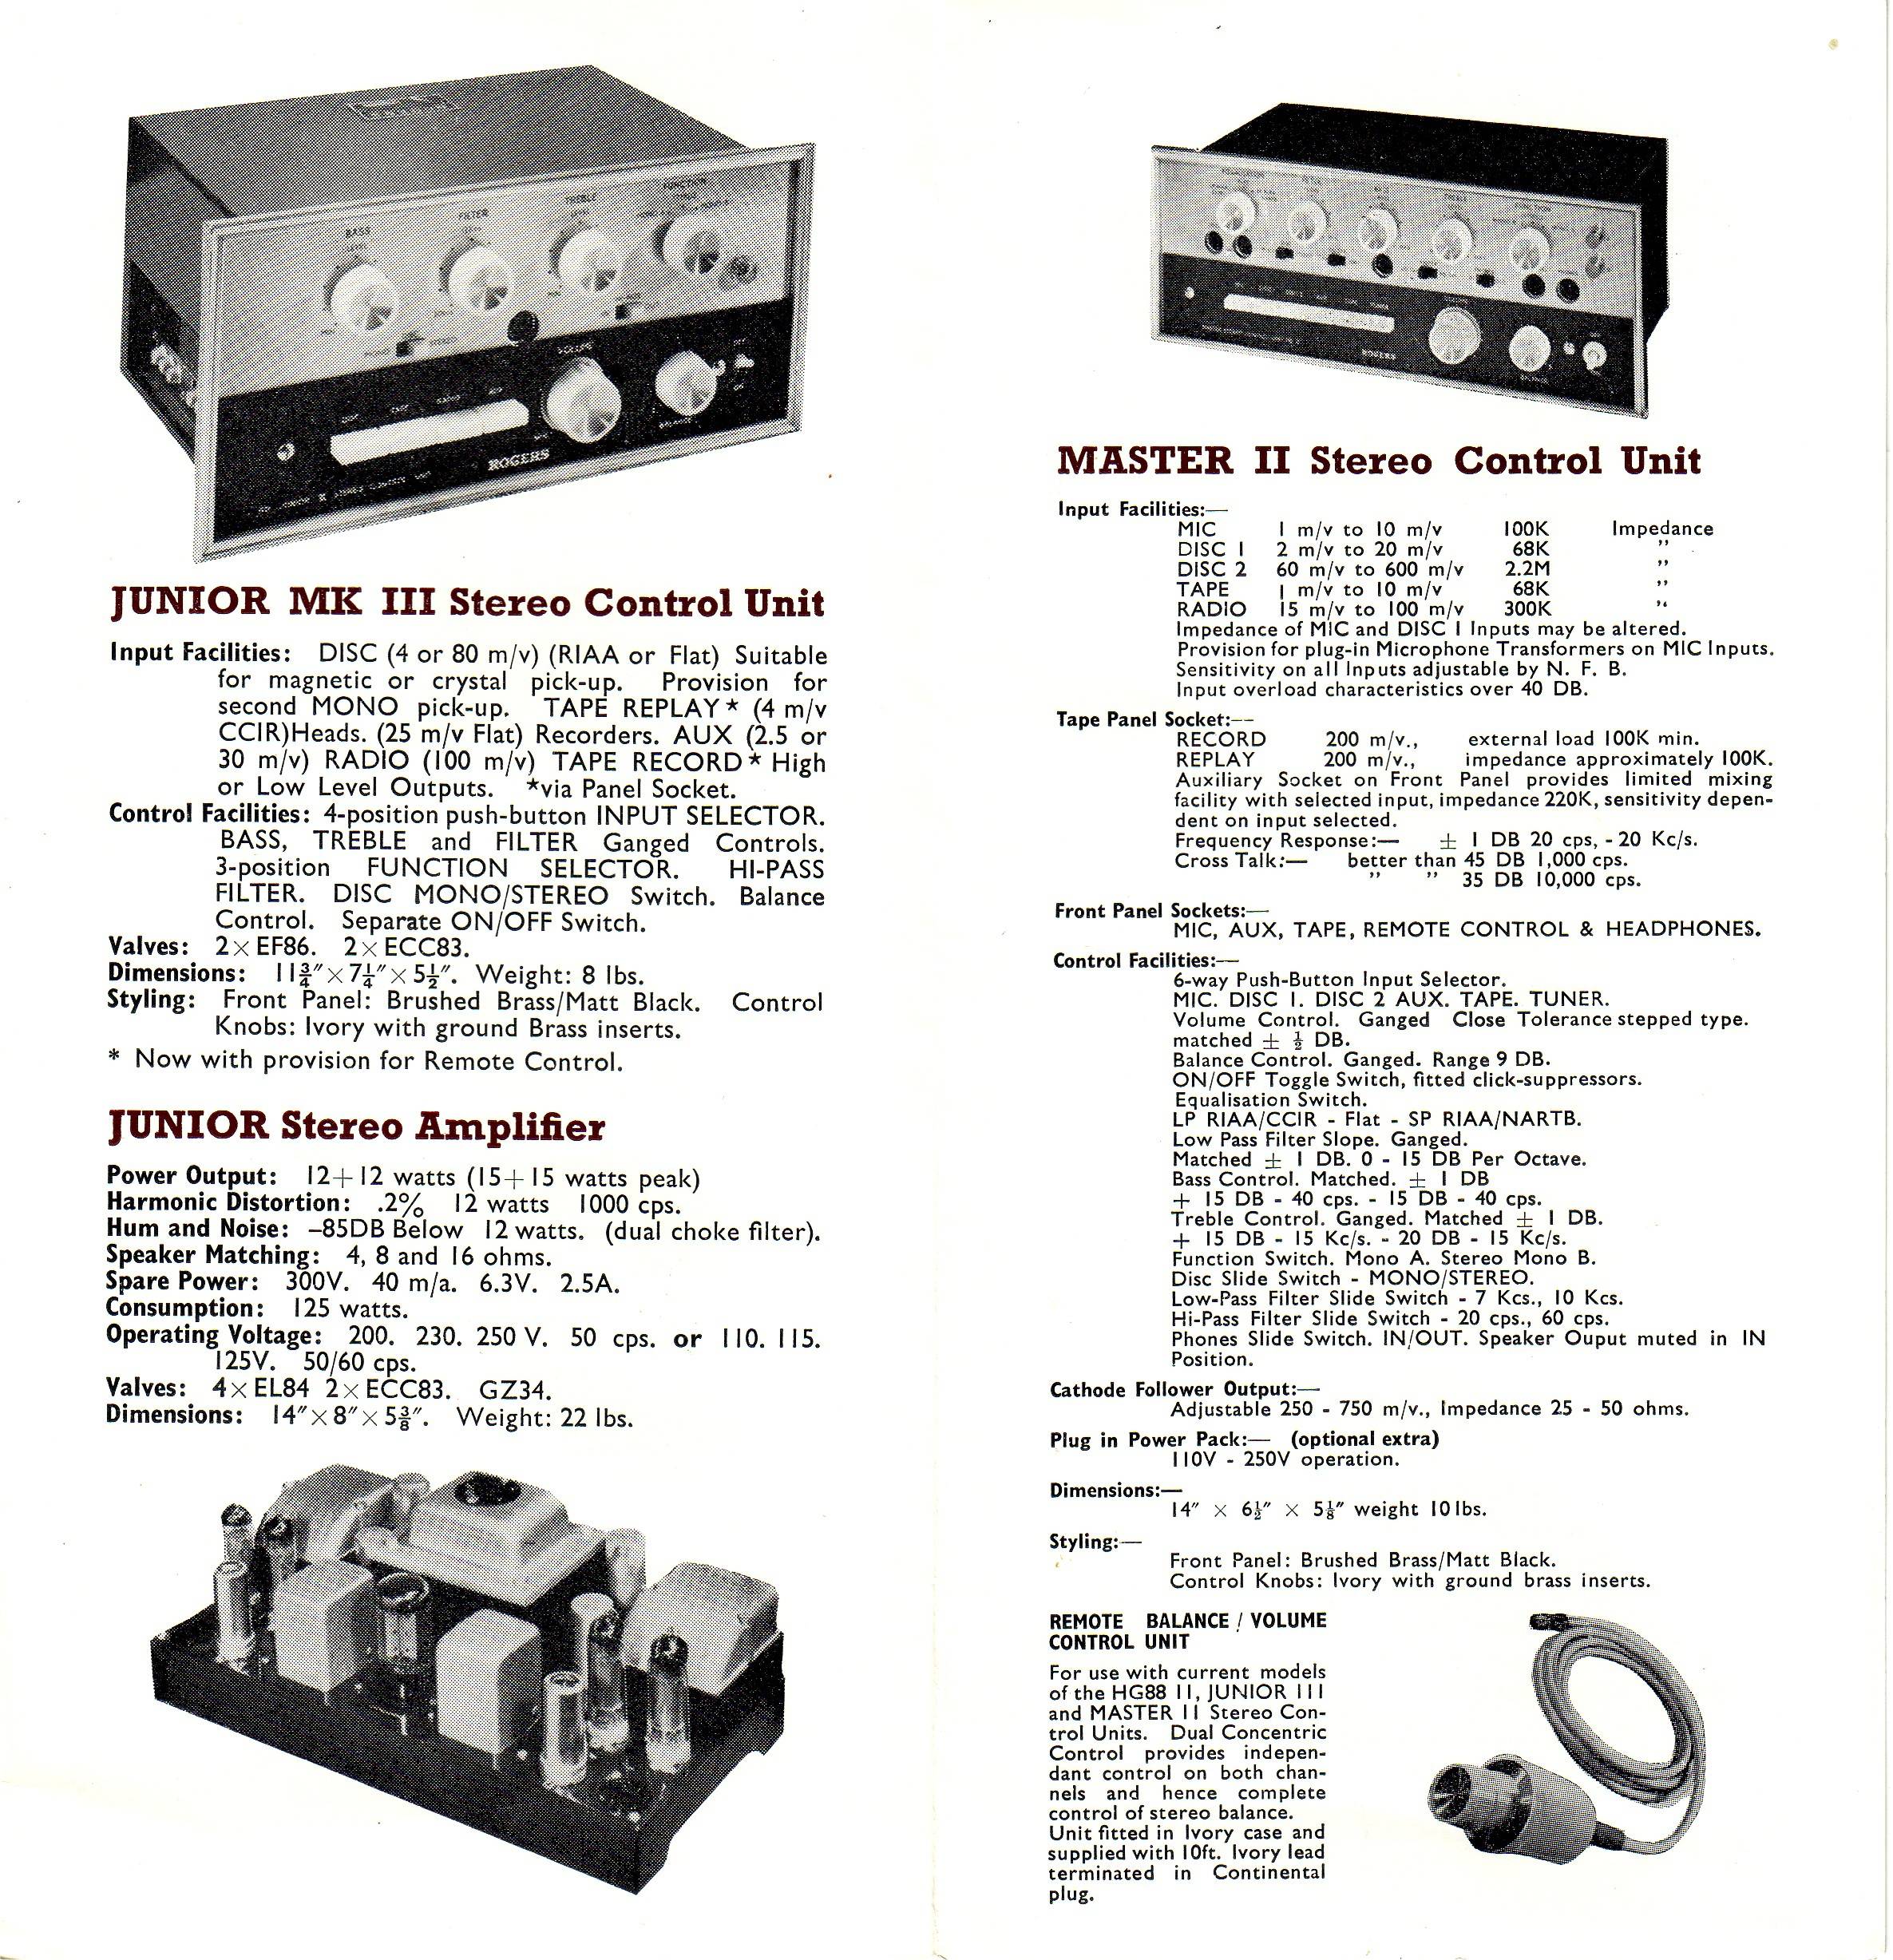 Rogers Master Stereo Control Unit